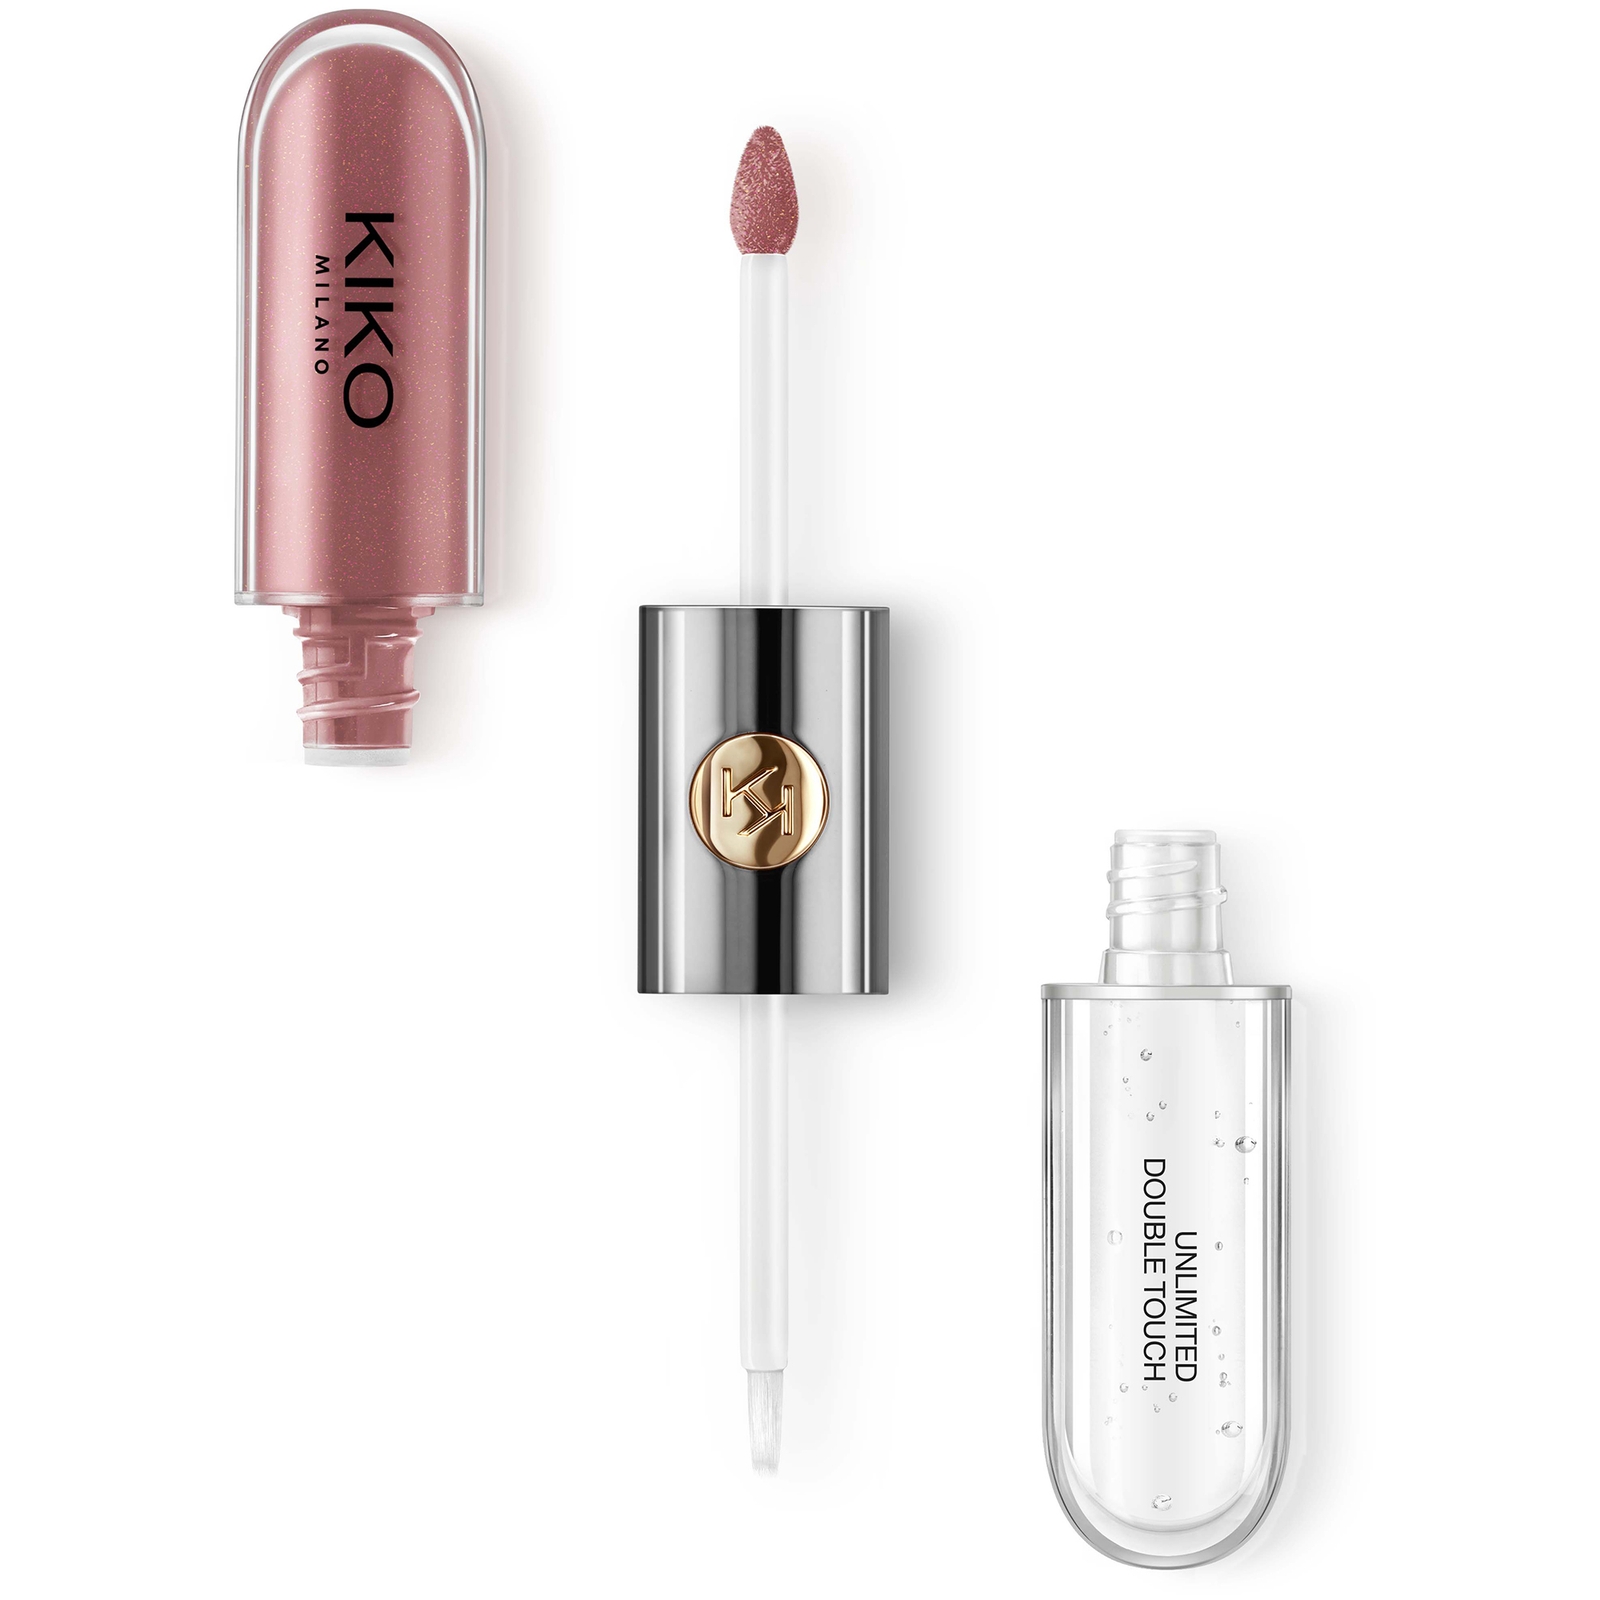 KIKO Milano Unlimited Double Touch 6ml (Various Shades) - 120 Rosy Mauve